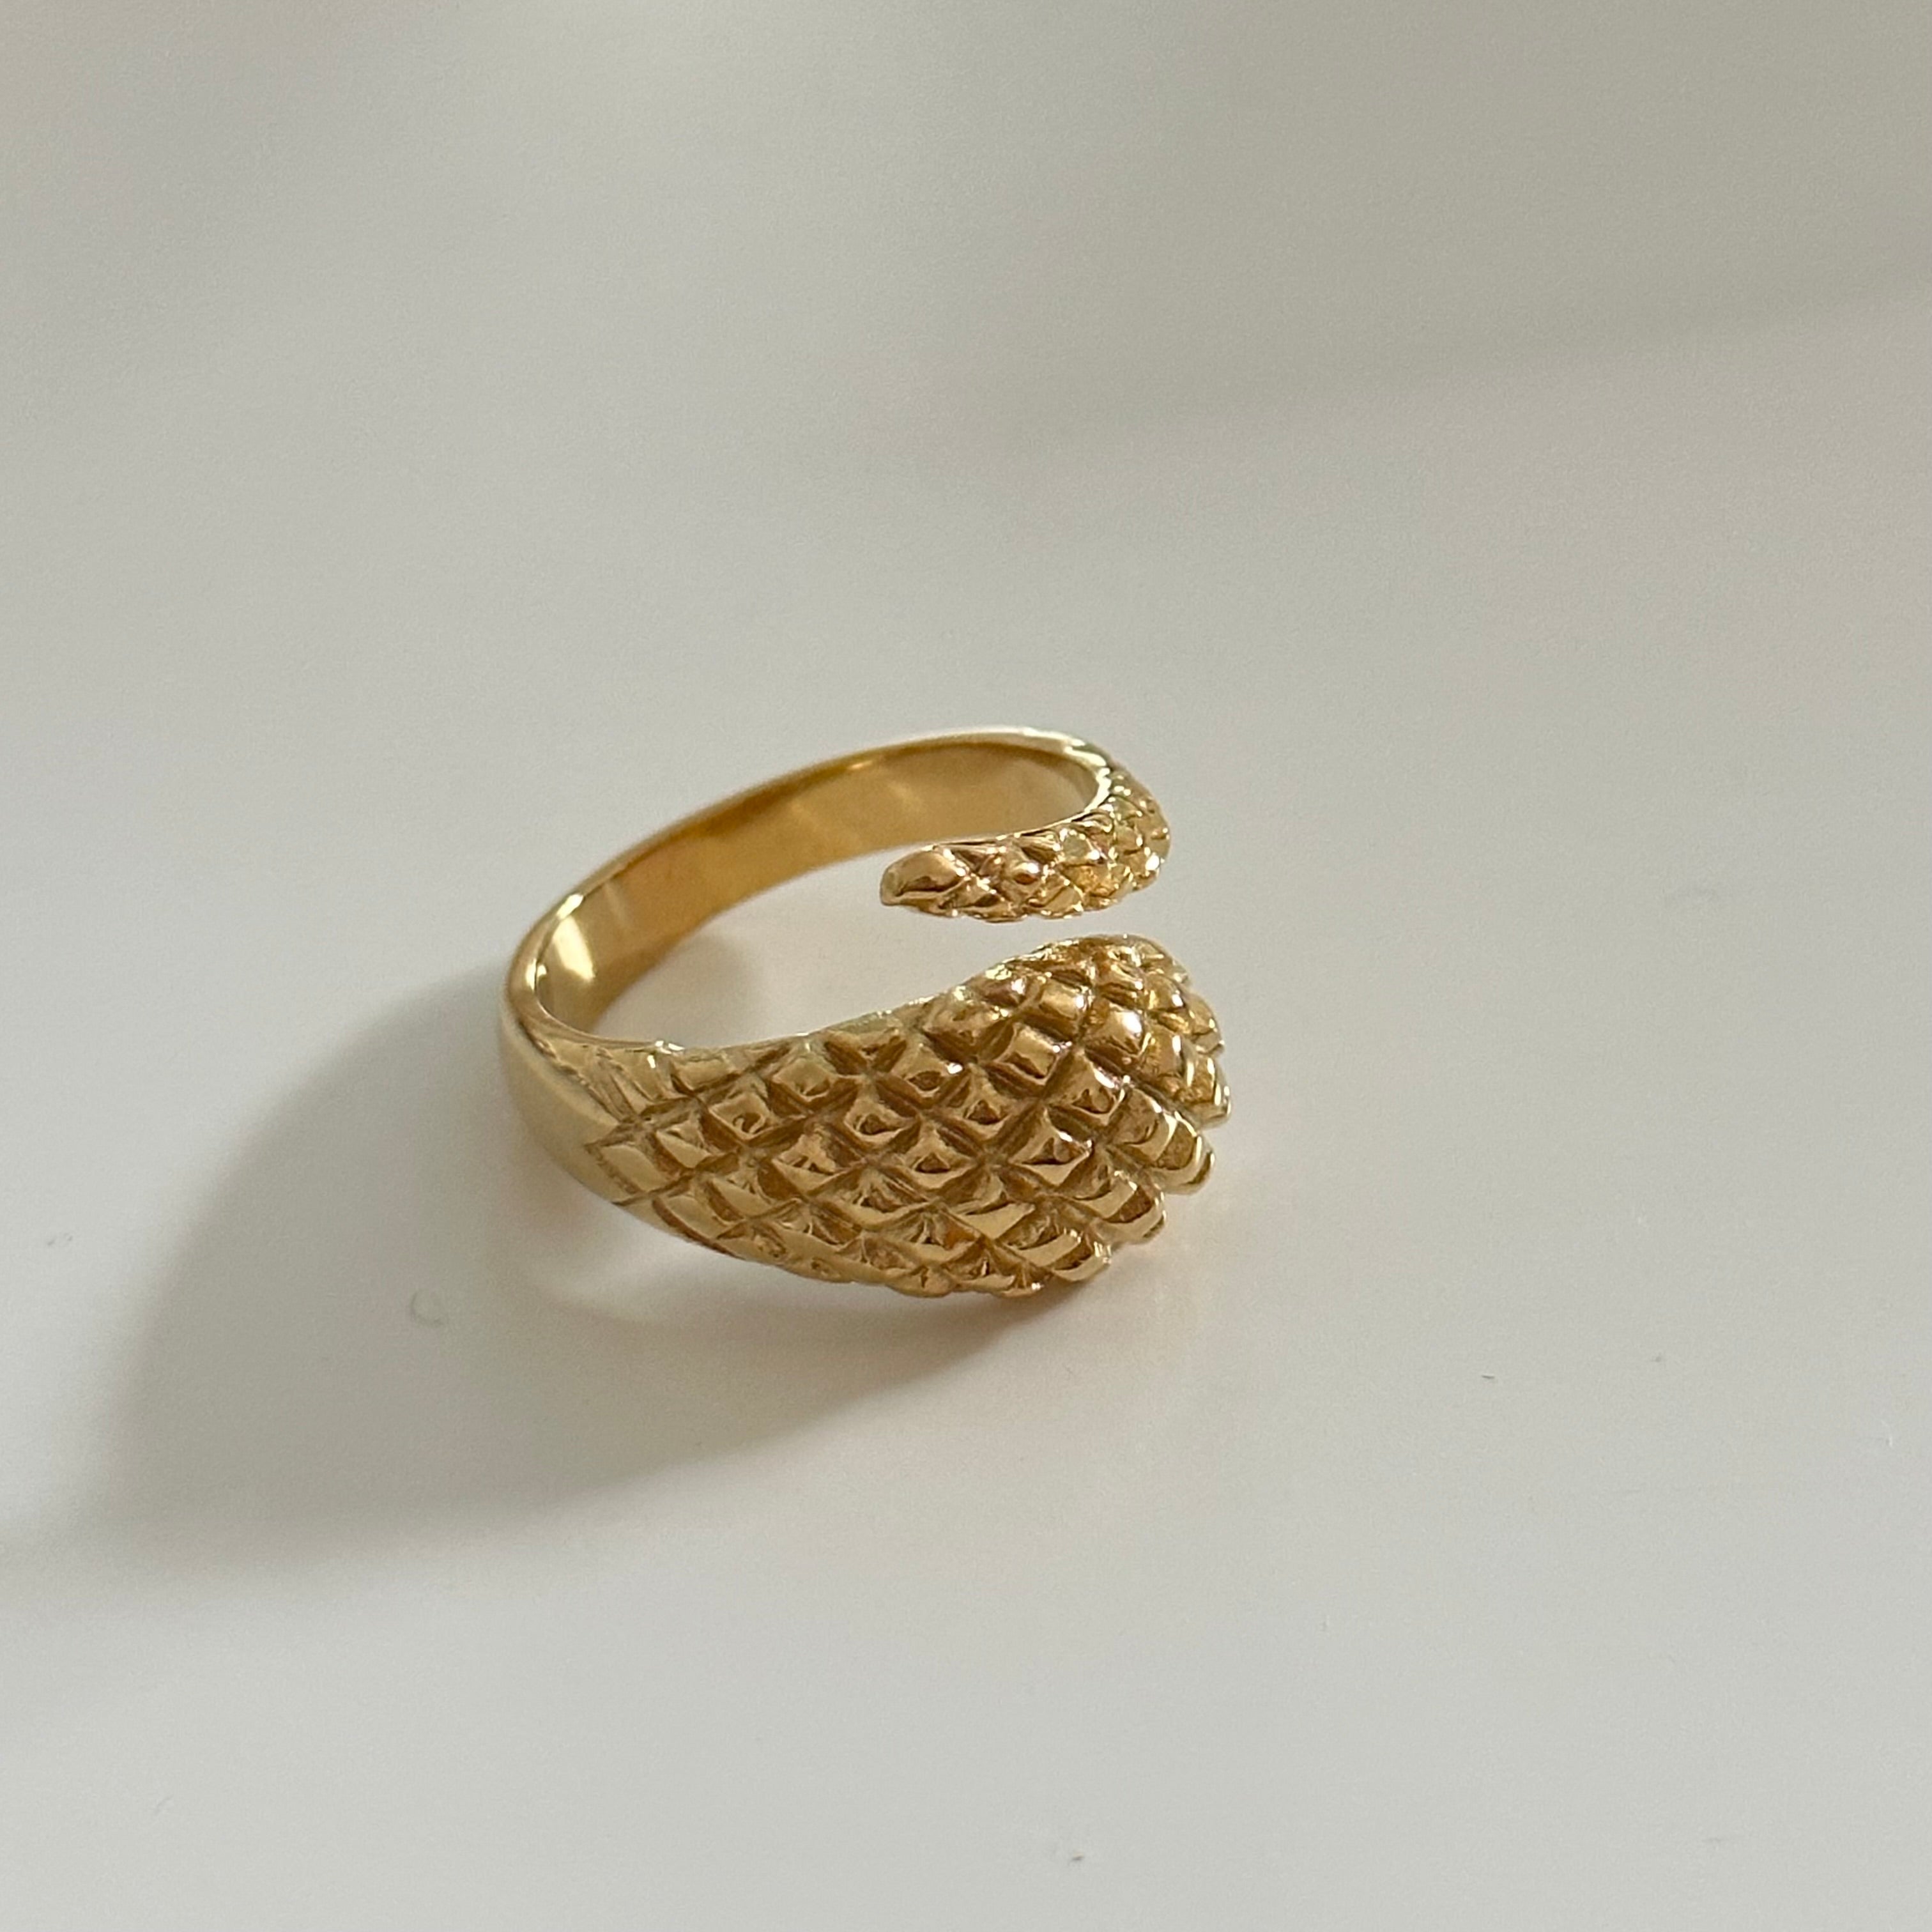 Crossover Serpent Wrap Ring in 18k Gold Plated Brass - The Nagini Ring